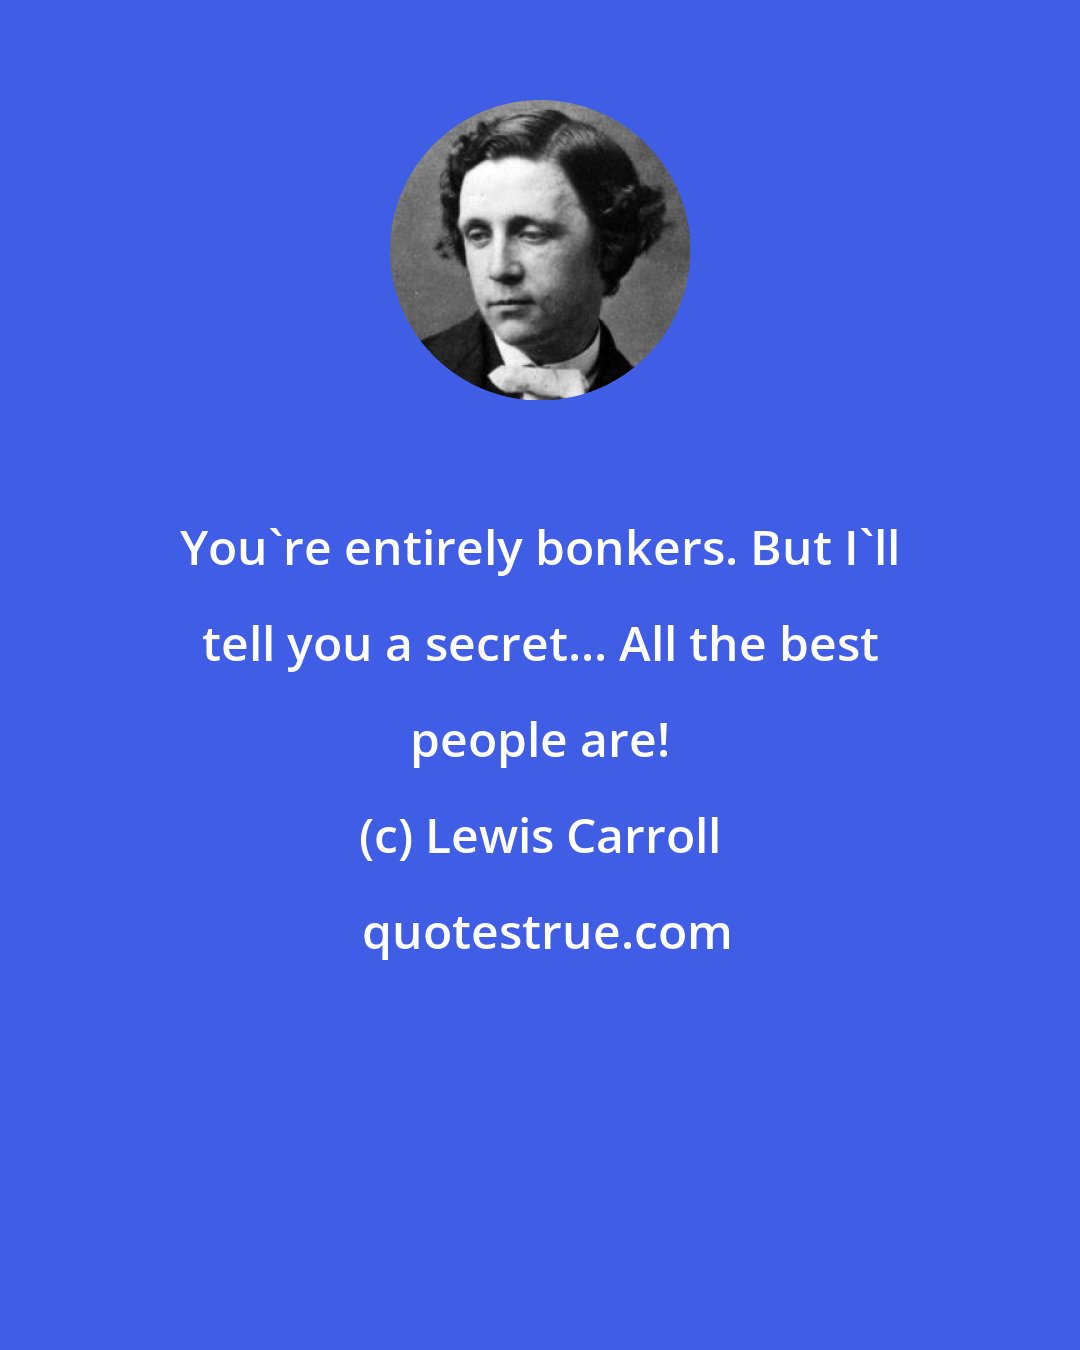 Lewis Carroll: You're entirely bonkers. But I'll tell you a secret... All the best people are!